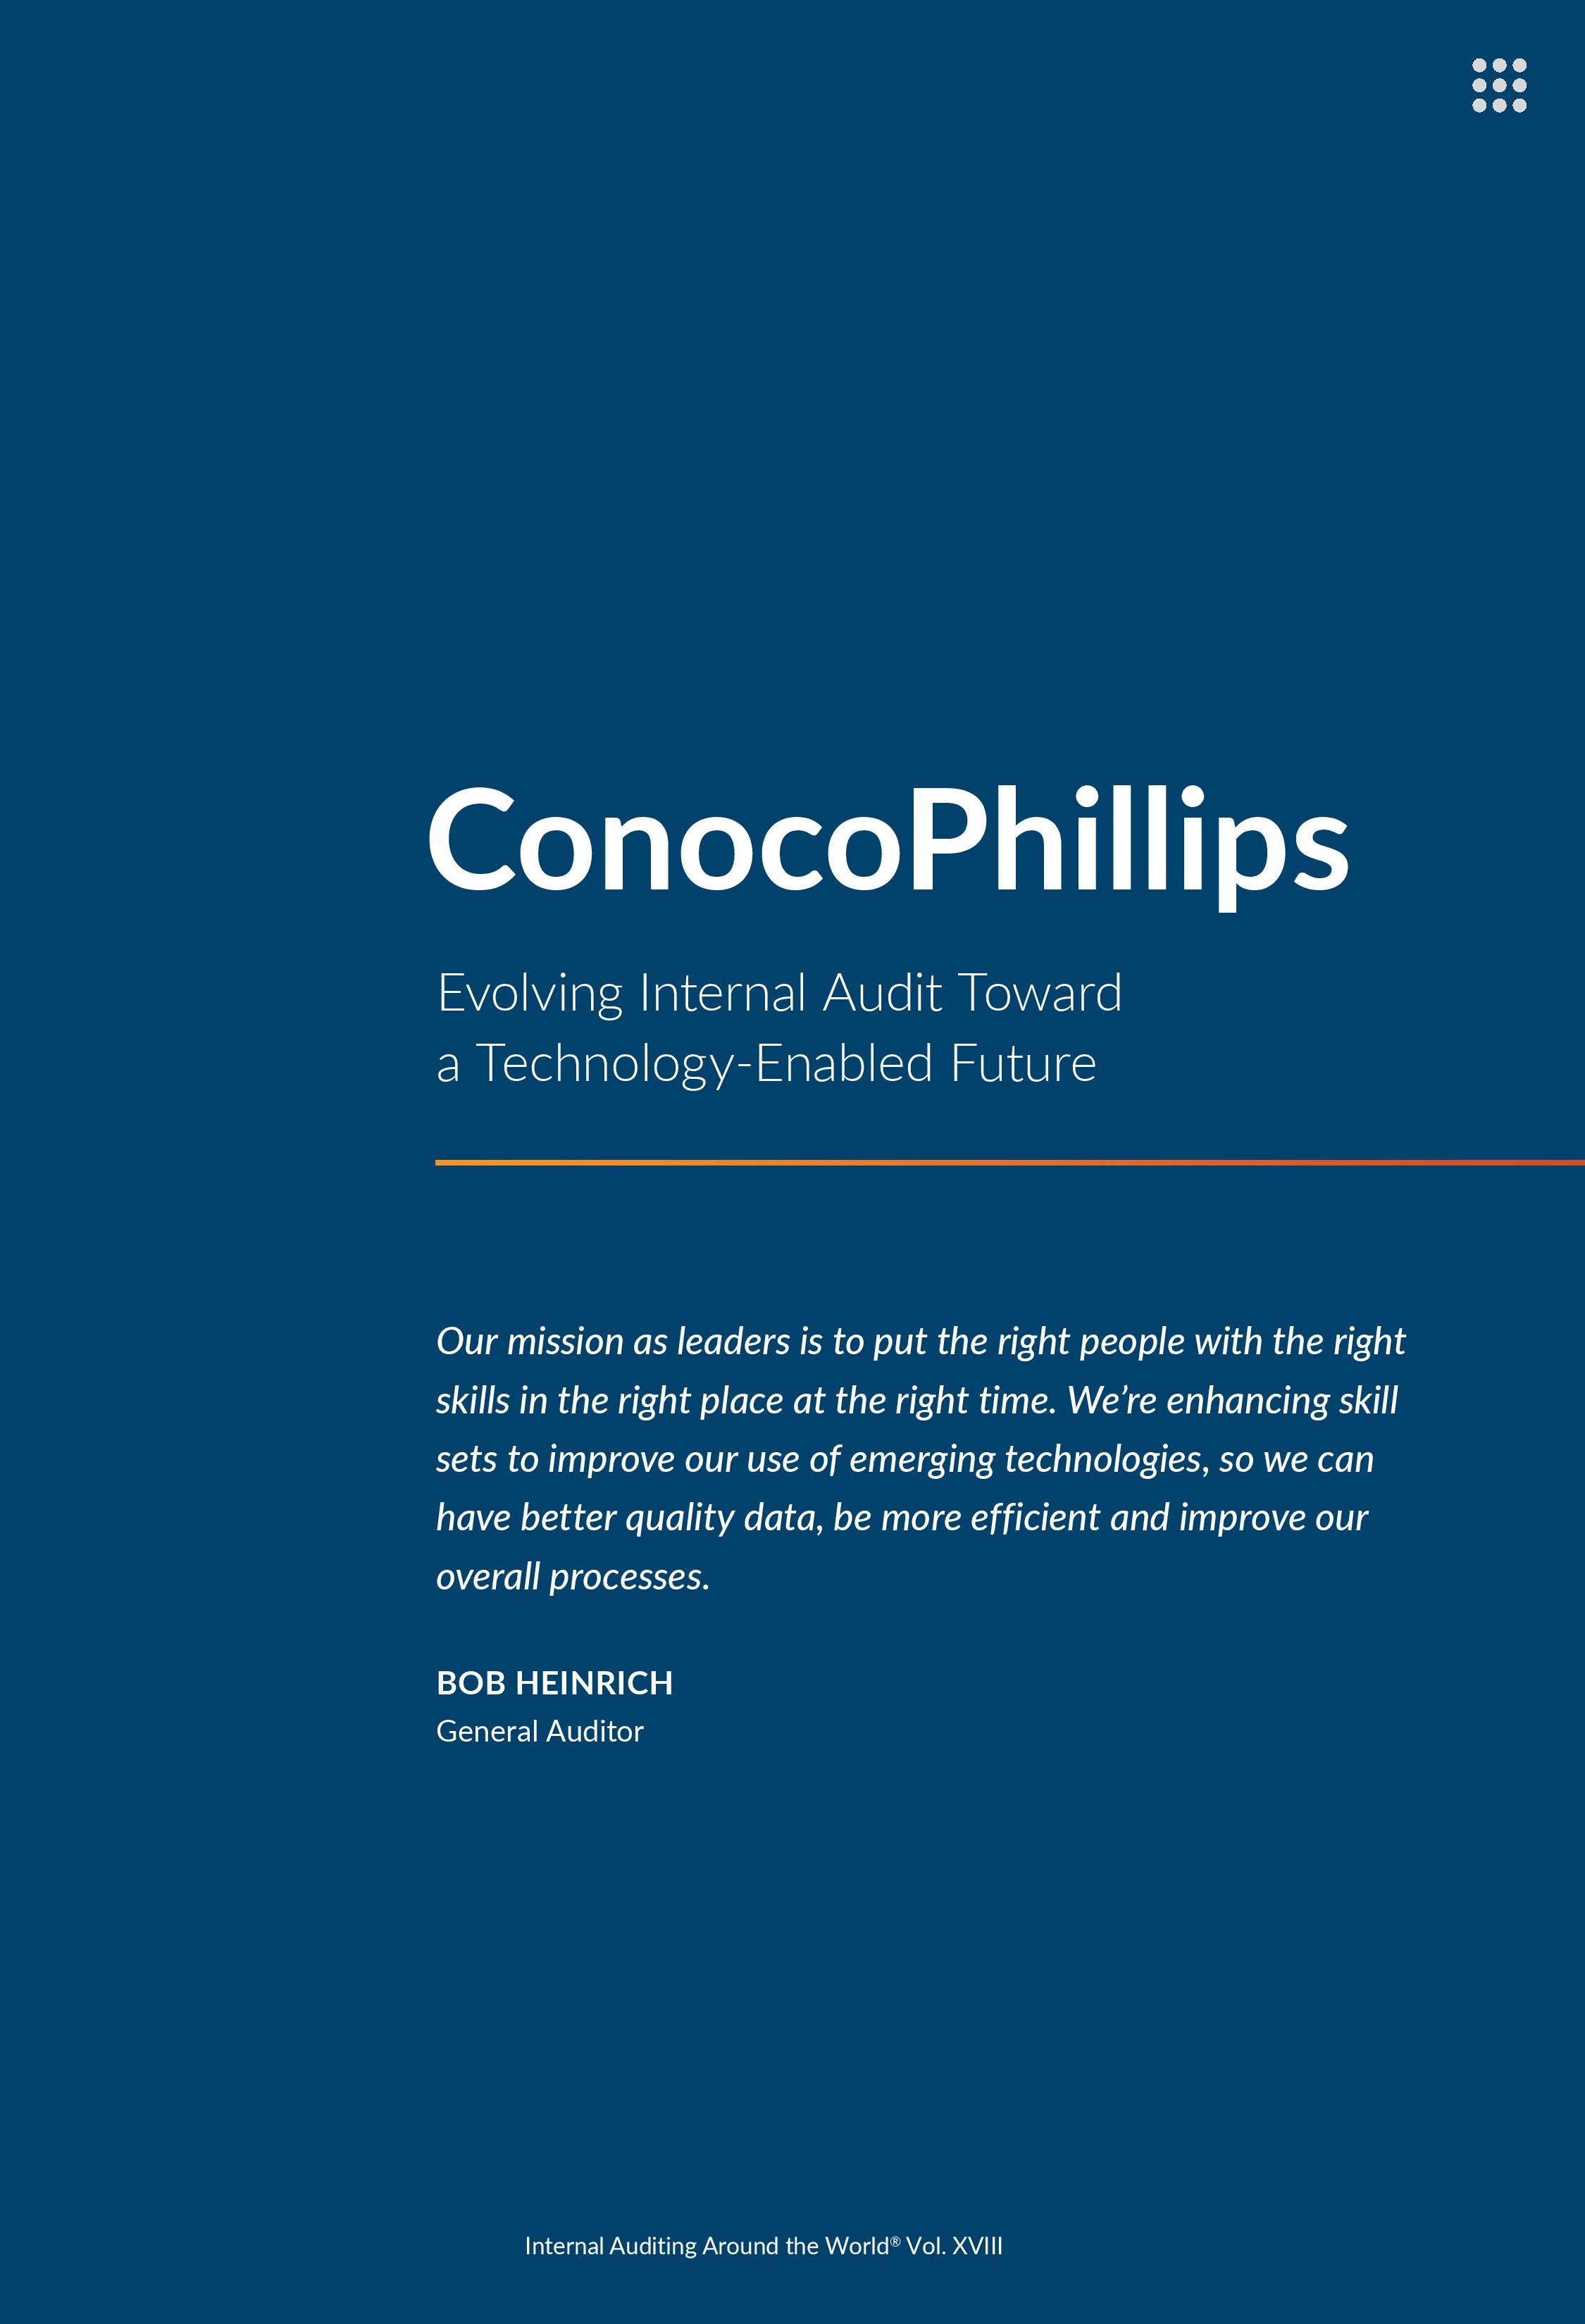 Screenshot of the first page of ConocoPhillips